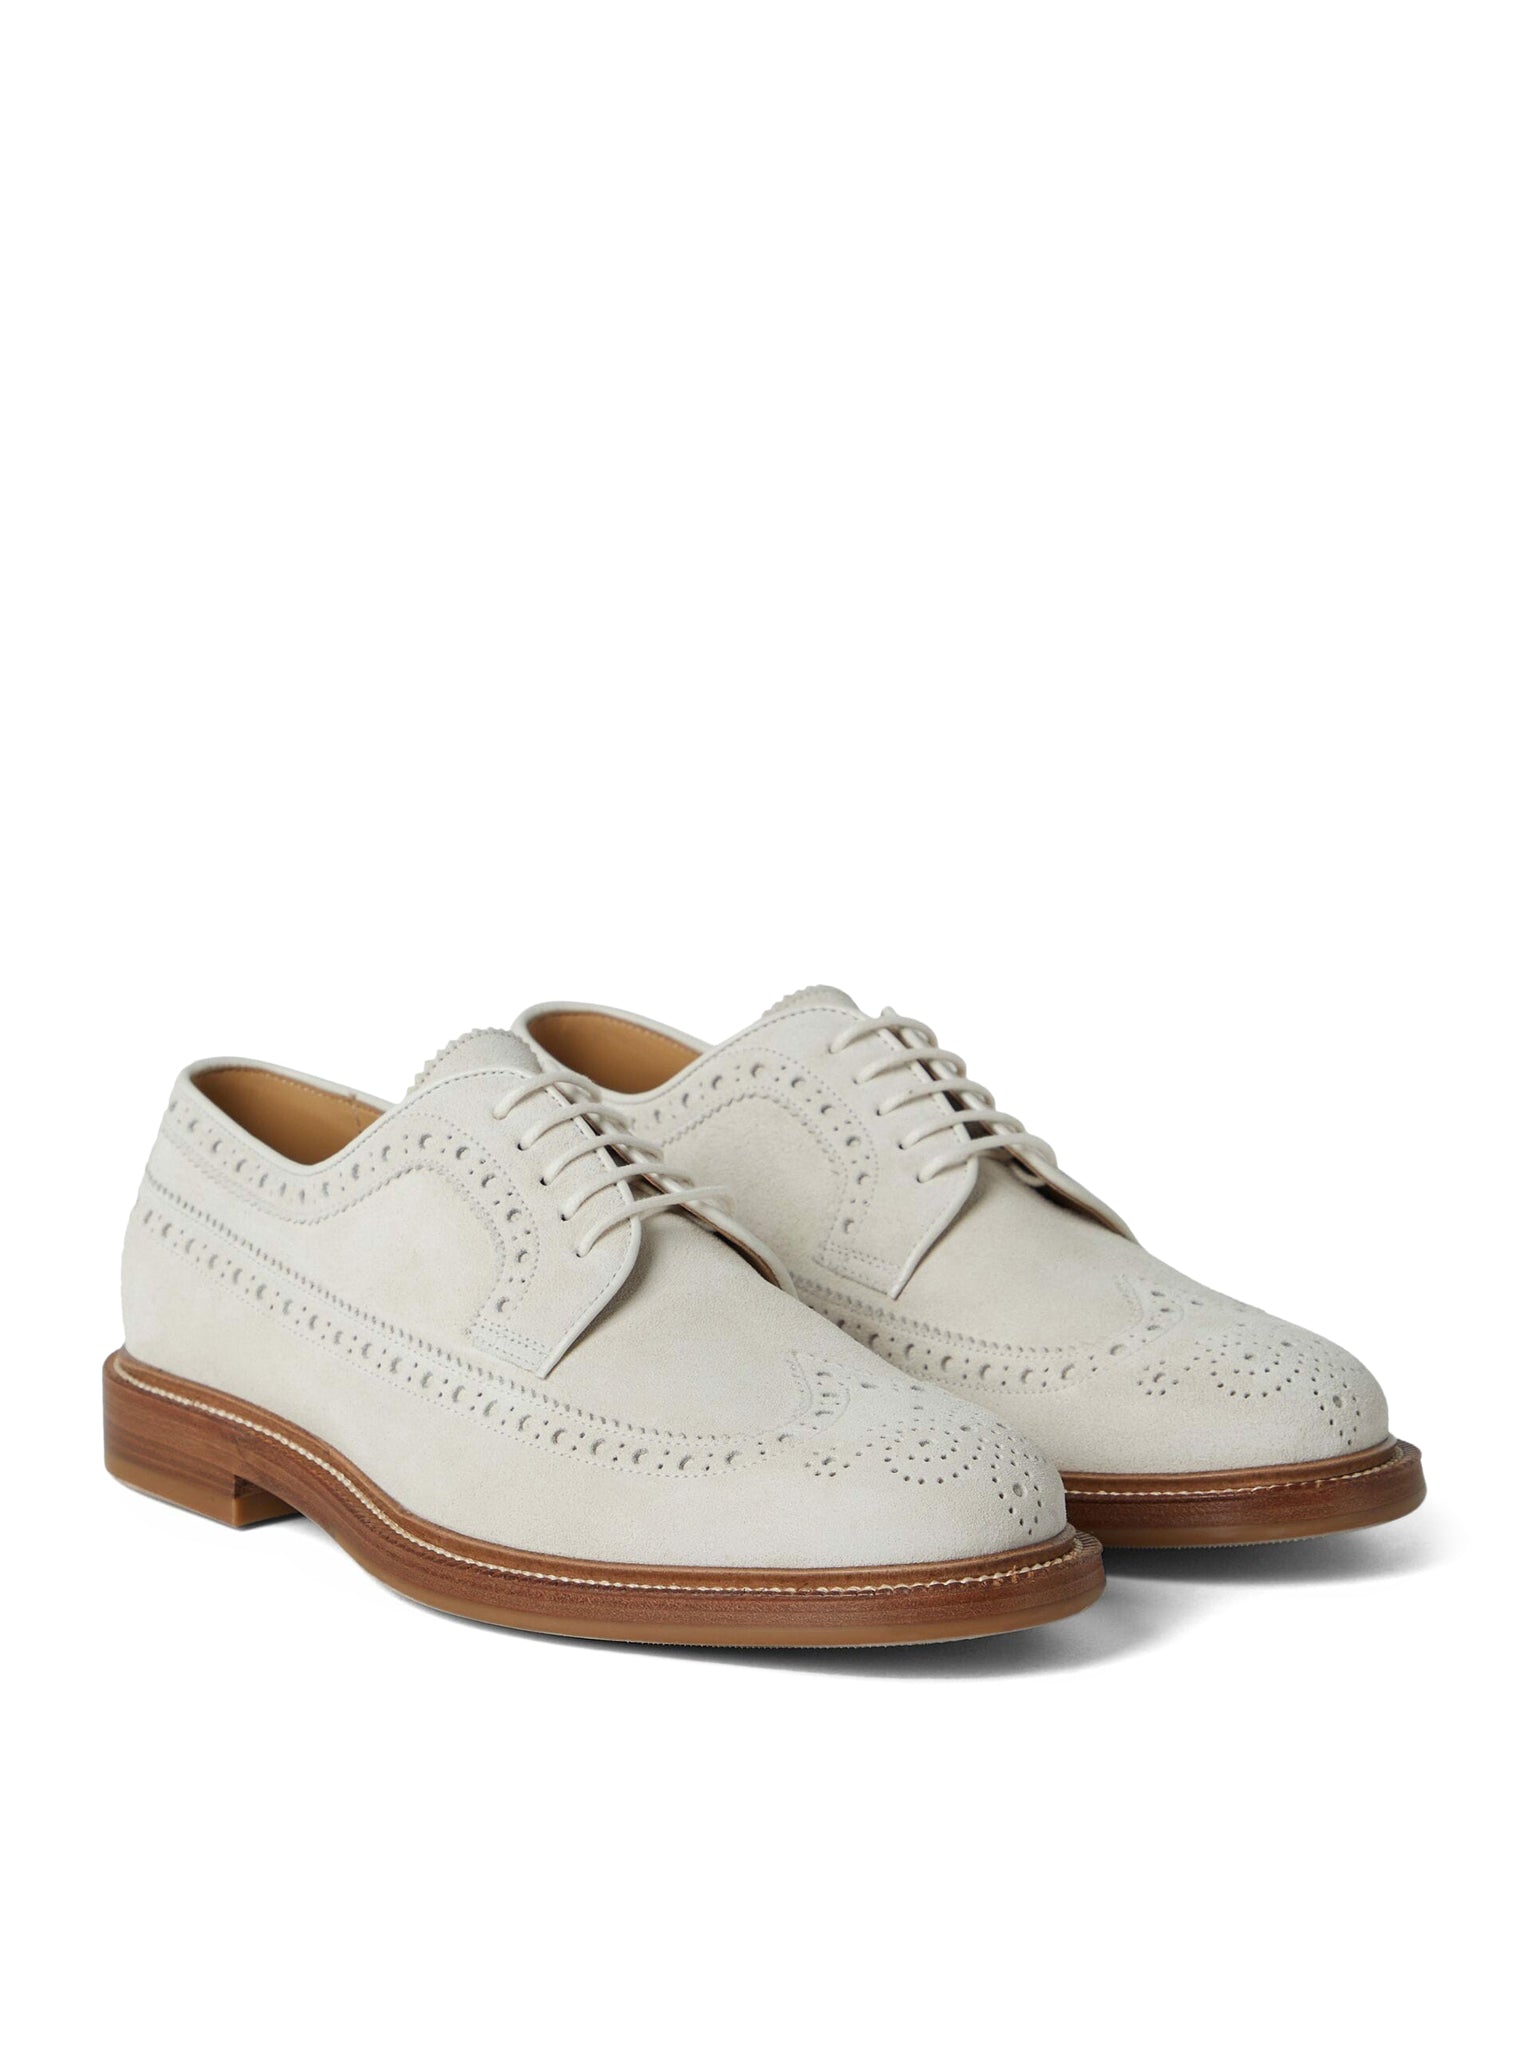 perforated-embellished suede derby shoes